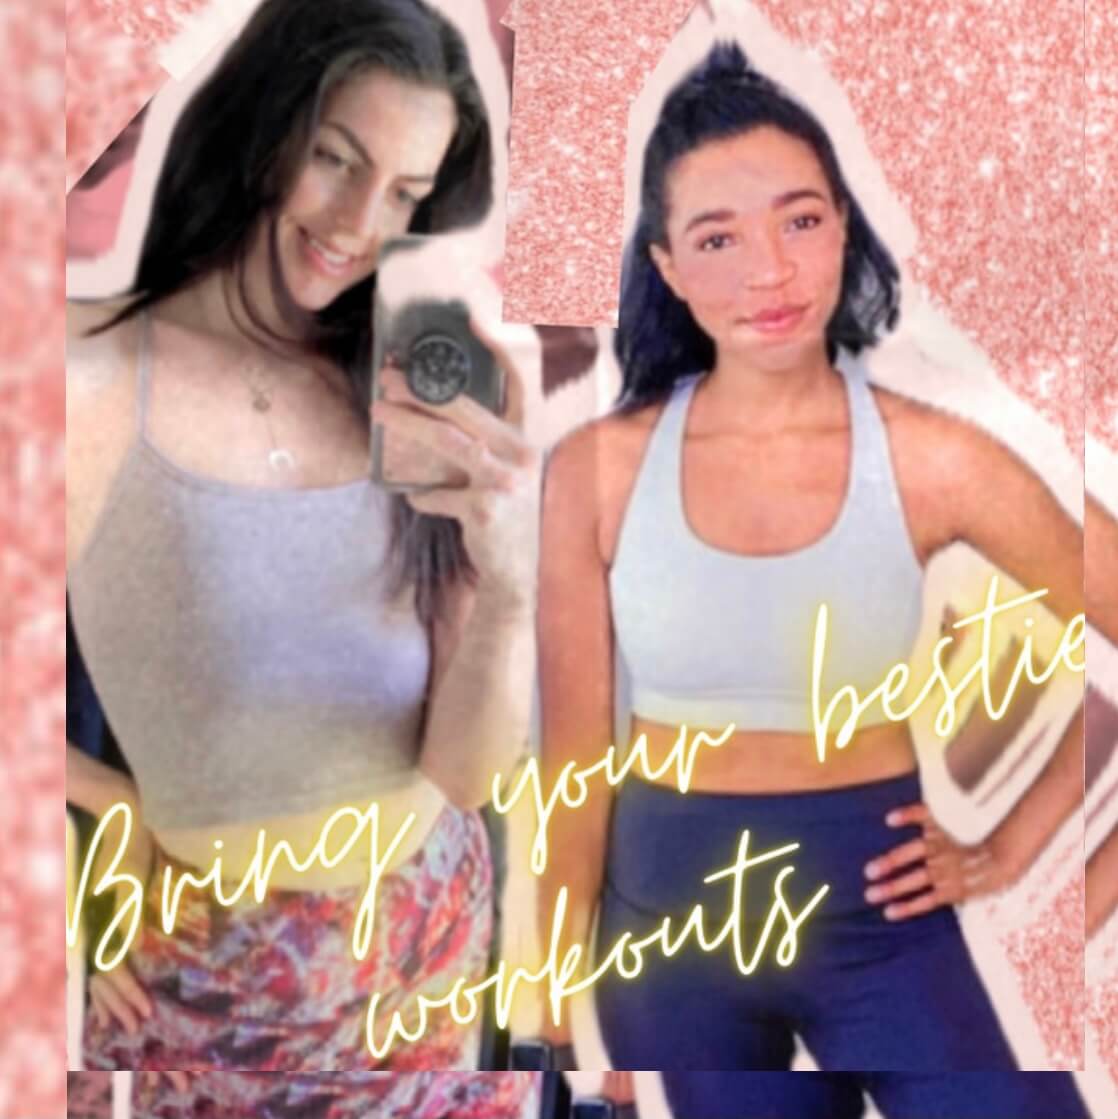 Image of Maddie And Sara with a pink filter in the background with writing that says bring your bestie workouts